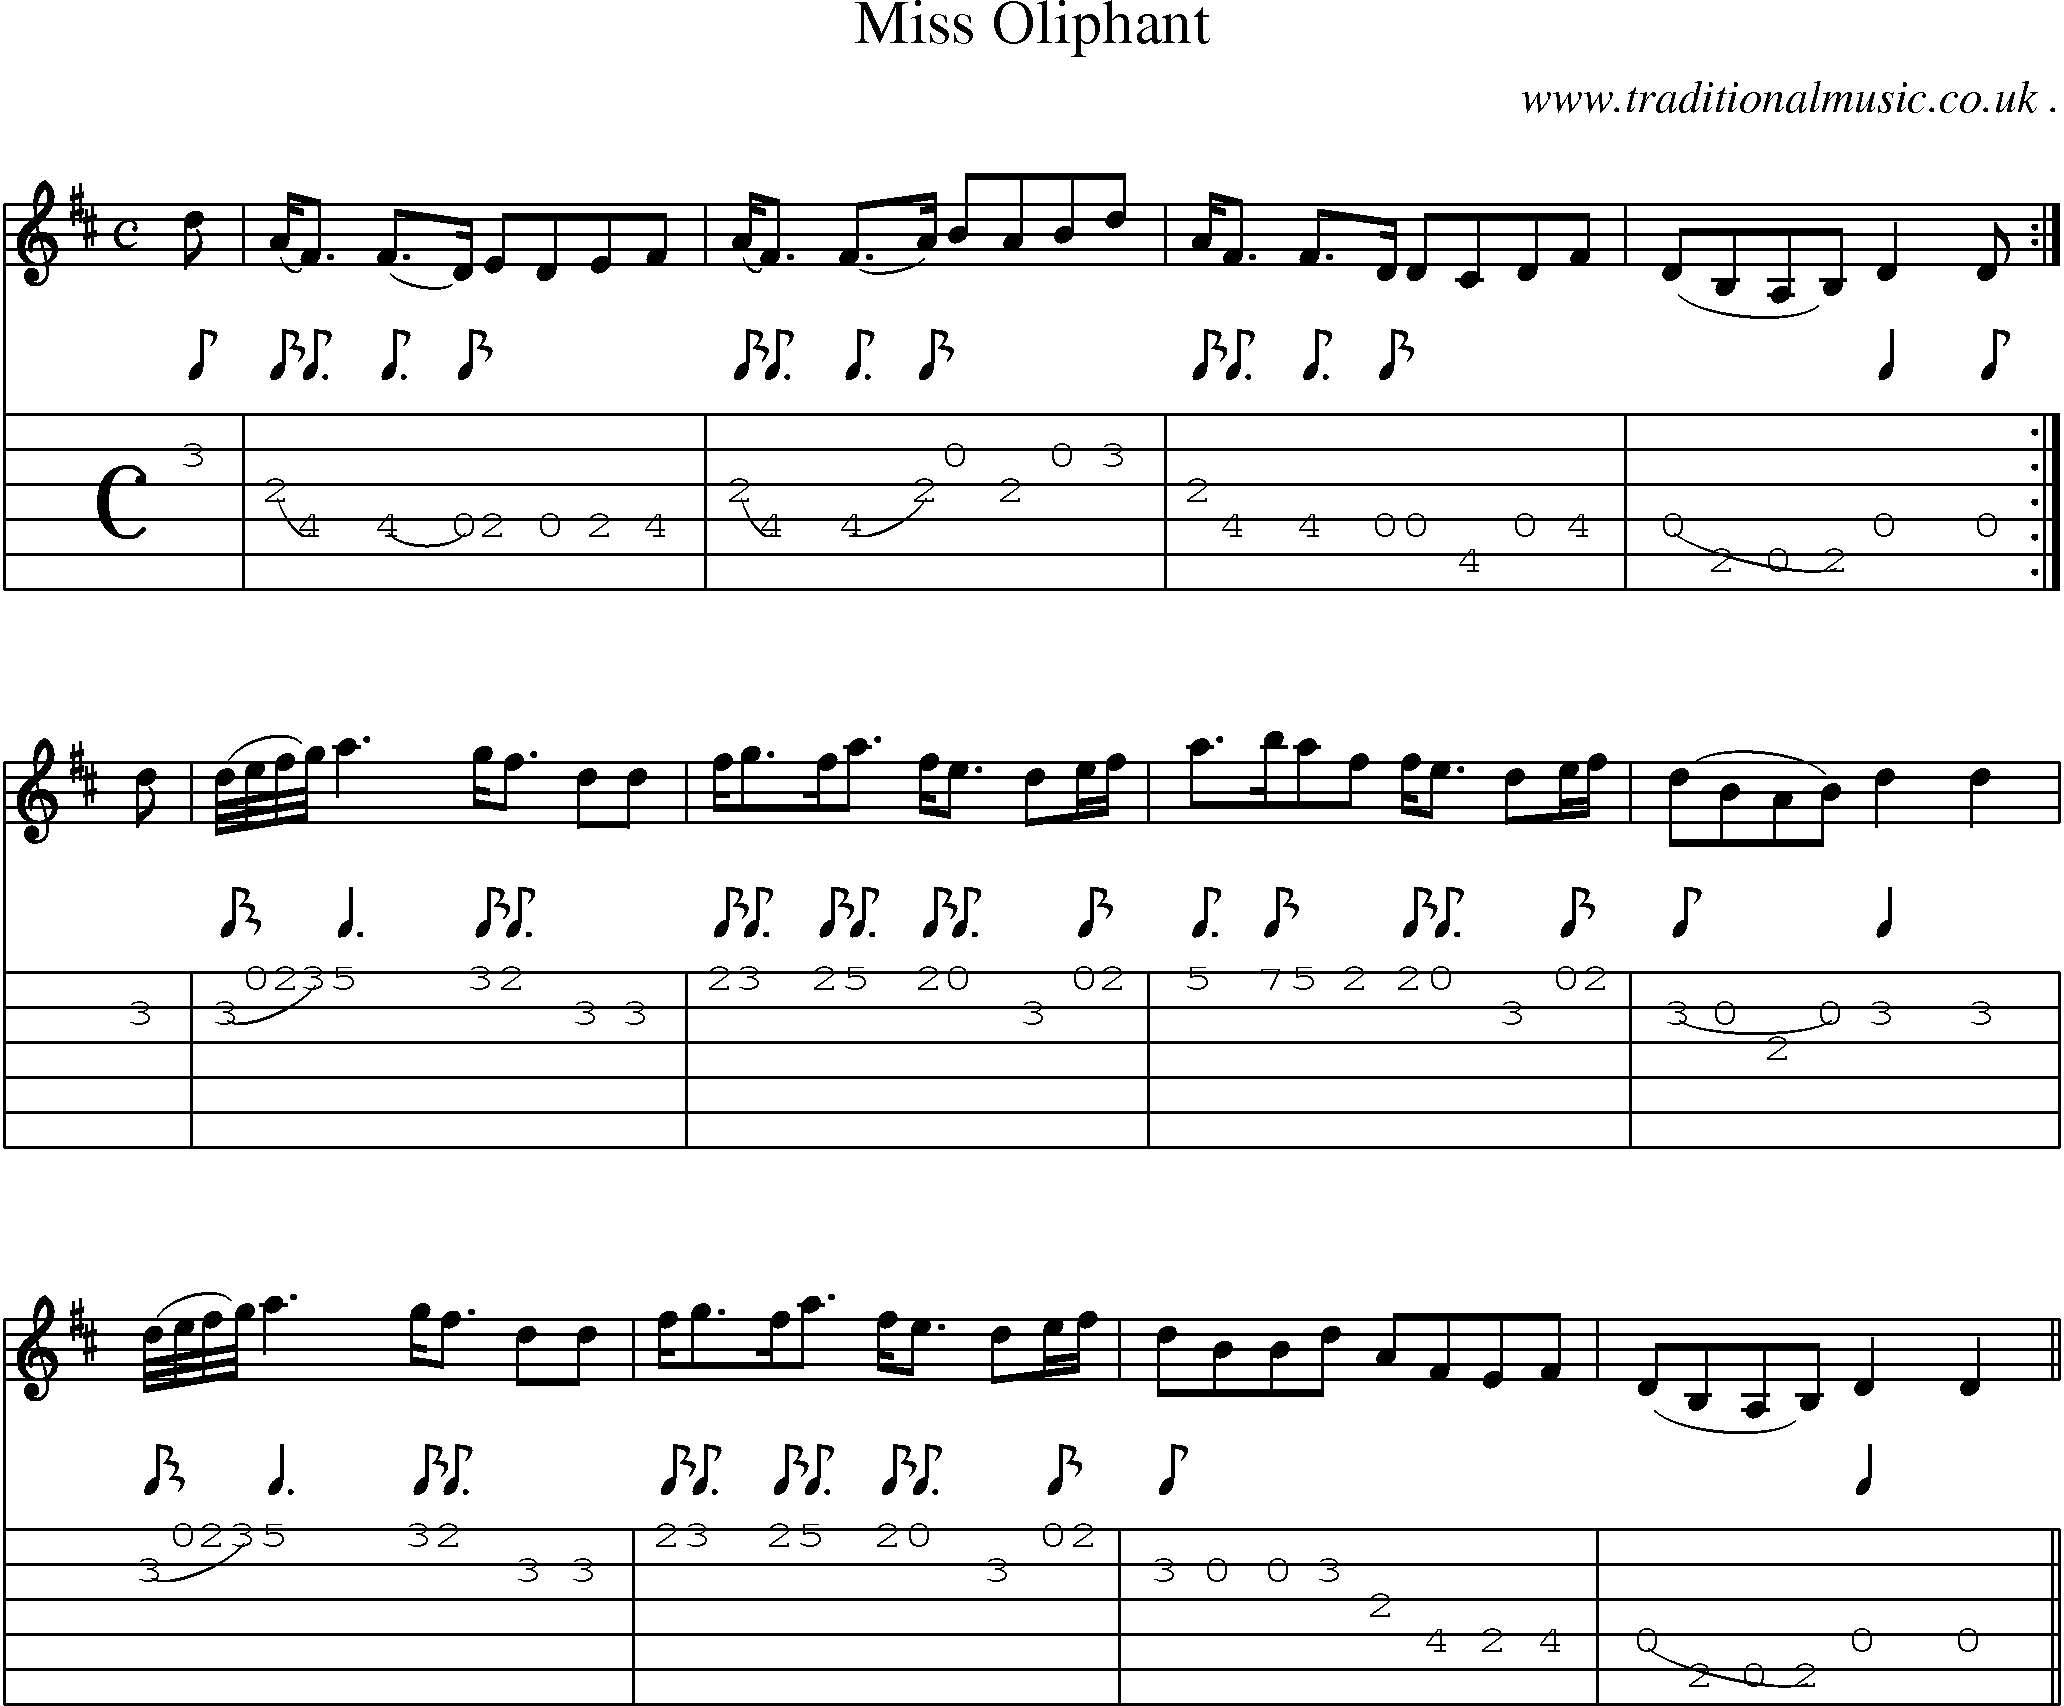 Sheet-music  score, Chords and Guitar Tabs for Miss Oliphant